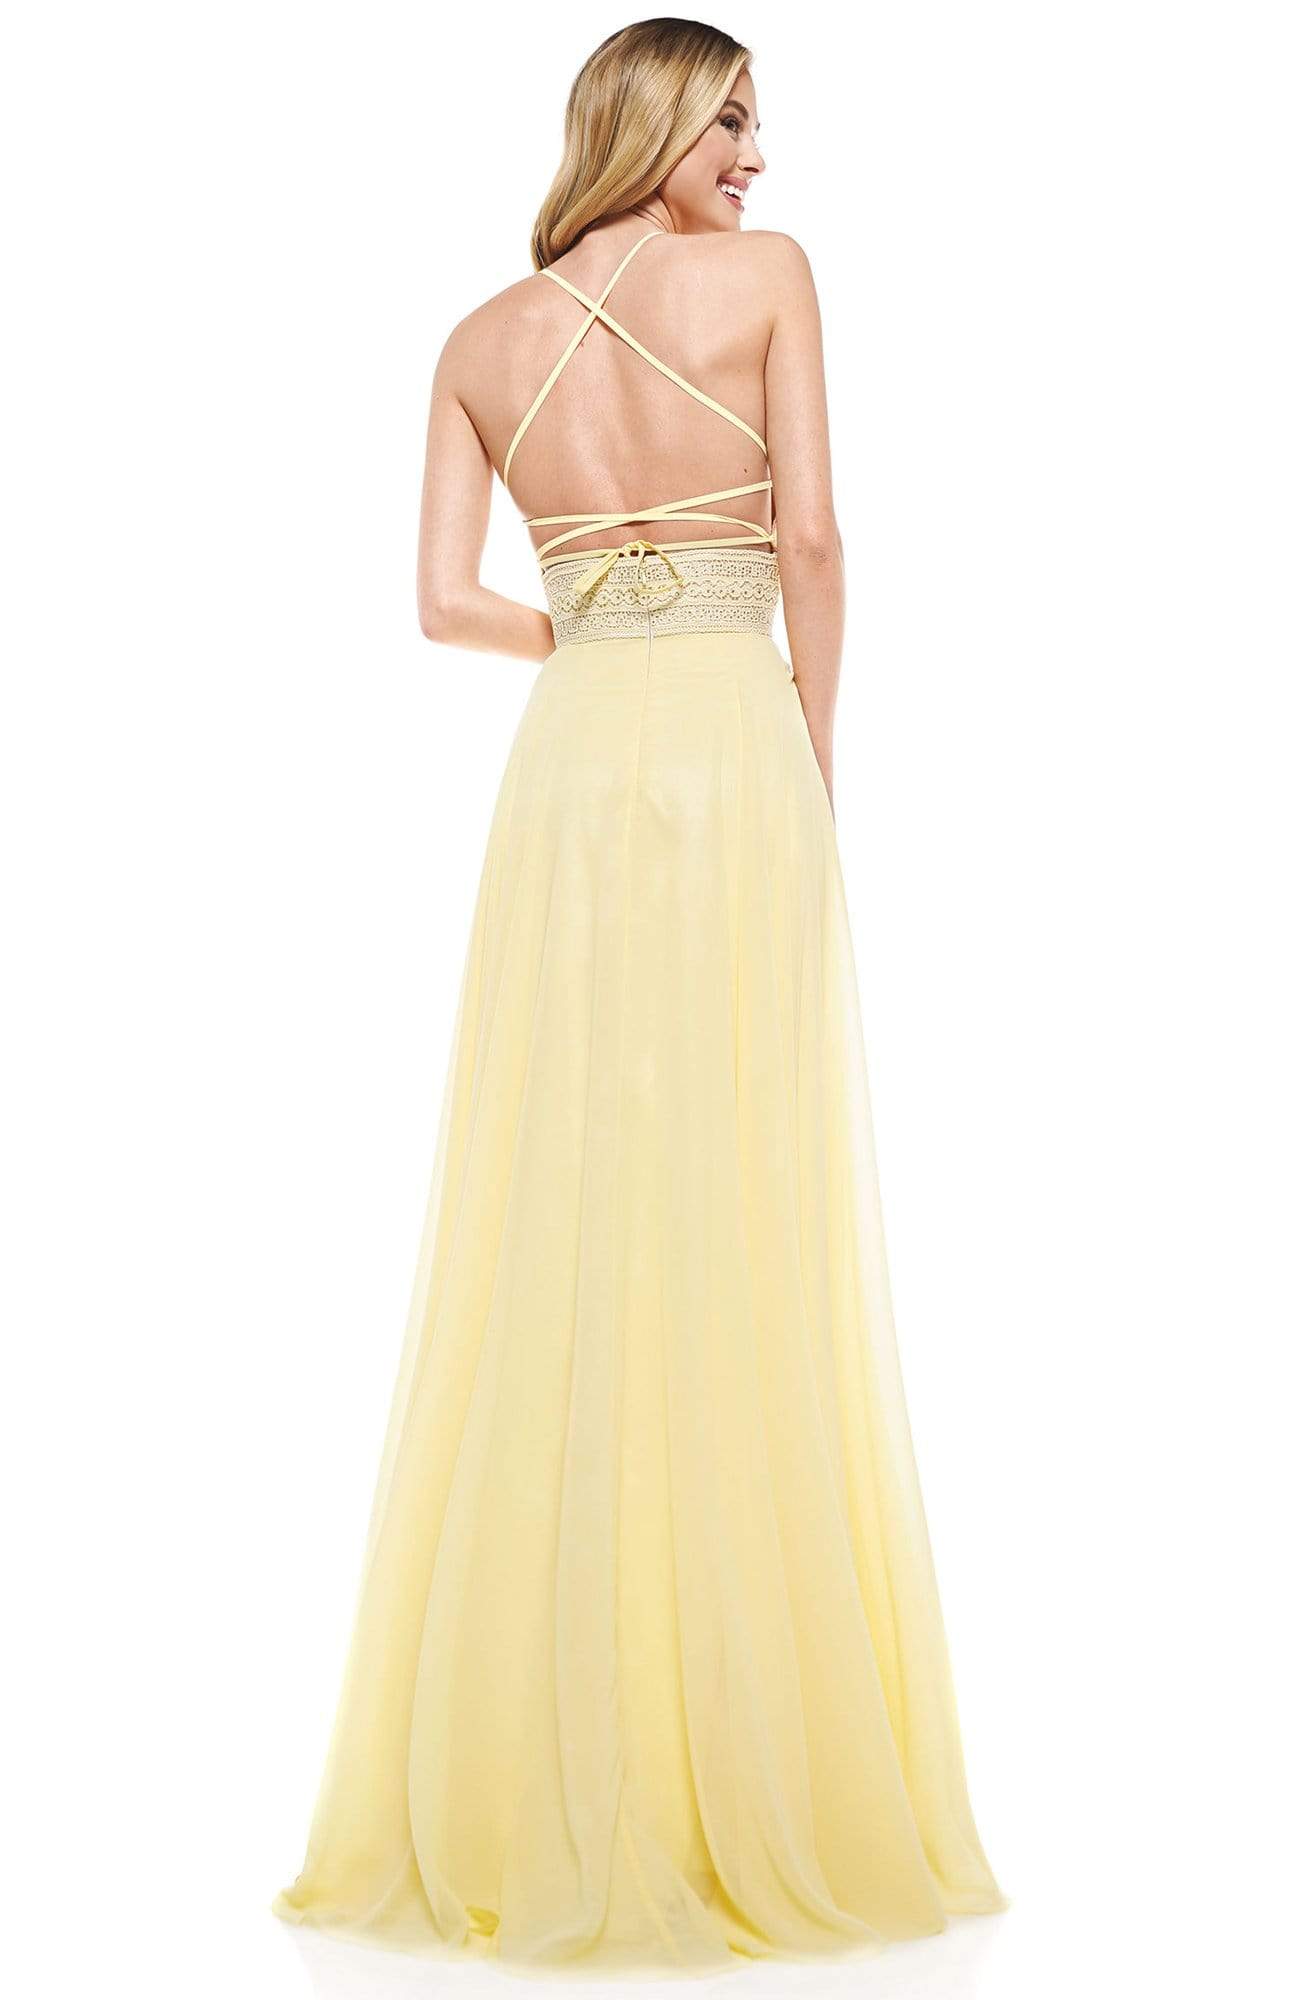 Glow Dress - G889 Strappy Sleeveless Lace Top Chiffon A-Line Gown Prom Dresses